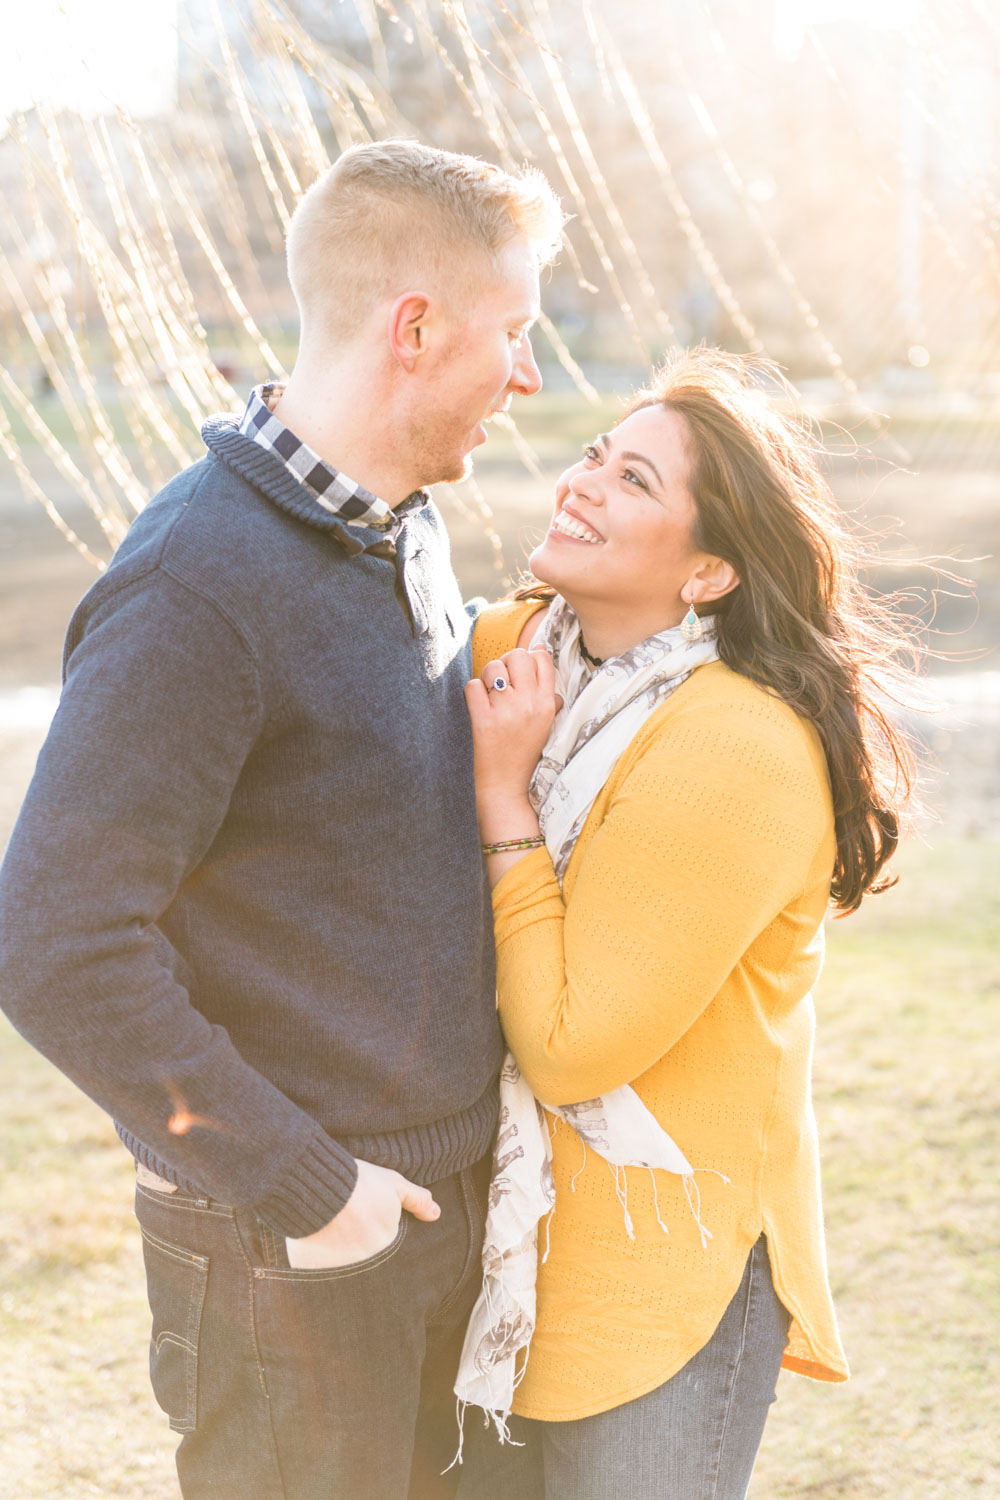 Andrea + Scott | Dog Lovers Boston Public Garden Casual Spring Sunrise Engagement Session | Boston and New England Engagement Photography | Lorna Stell Photo